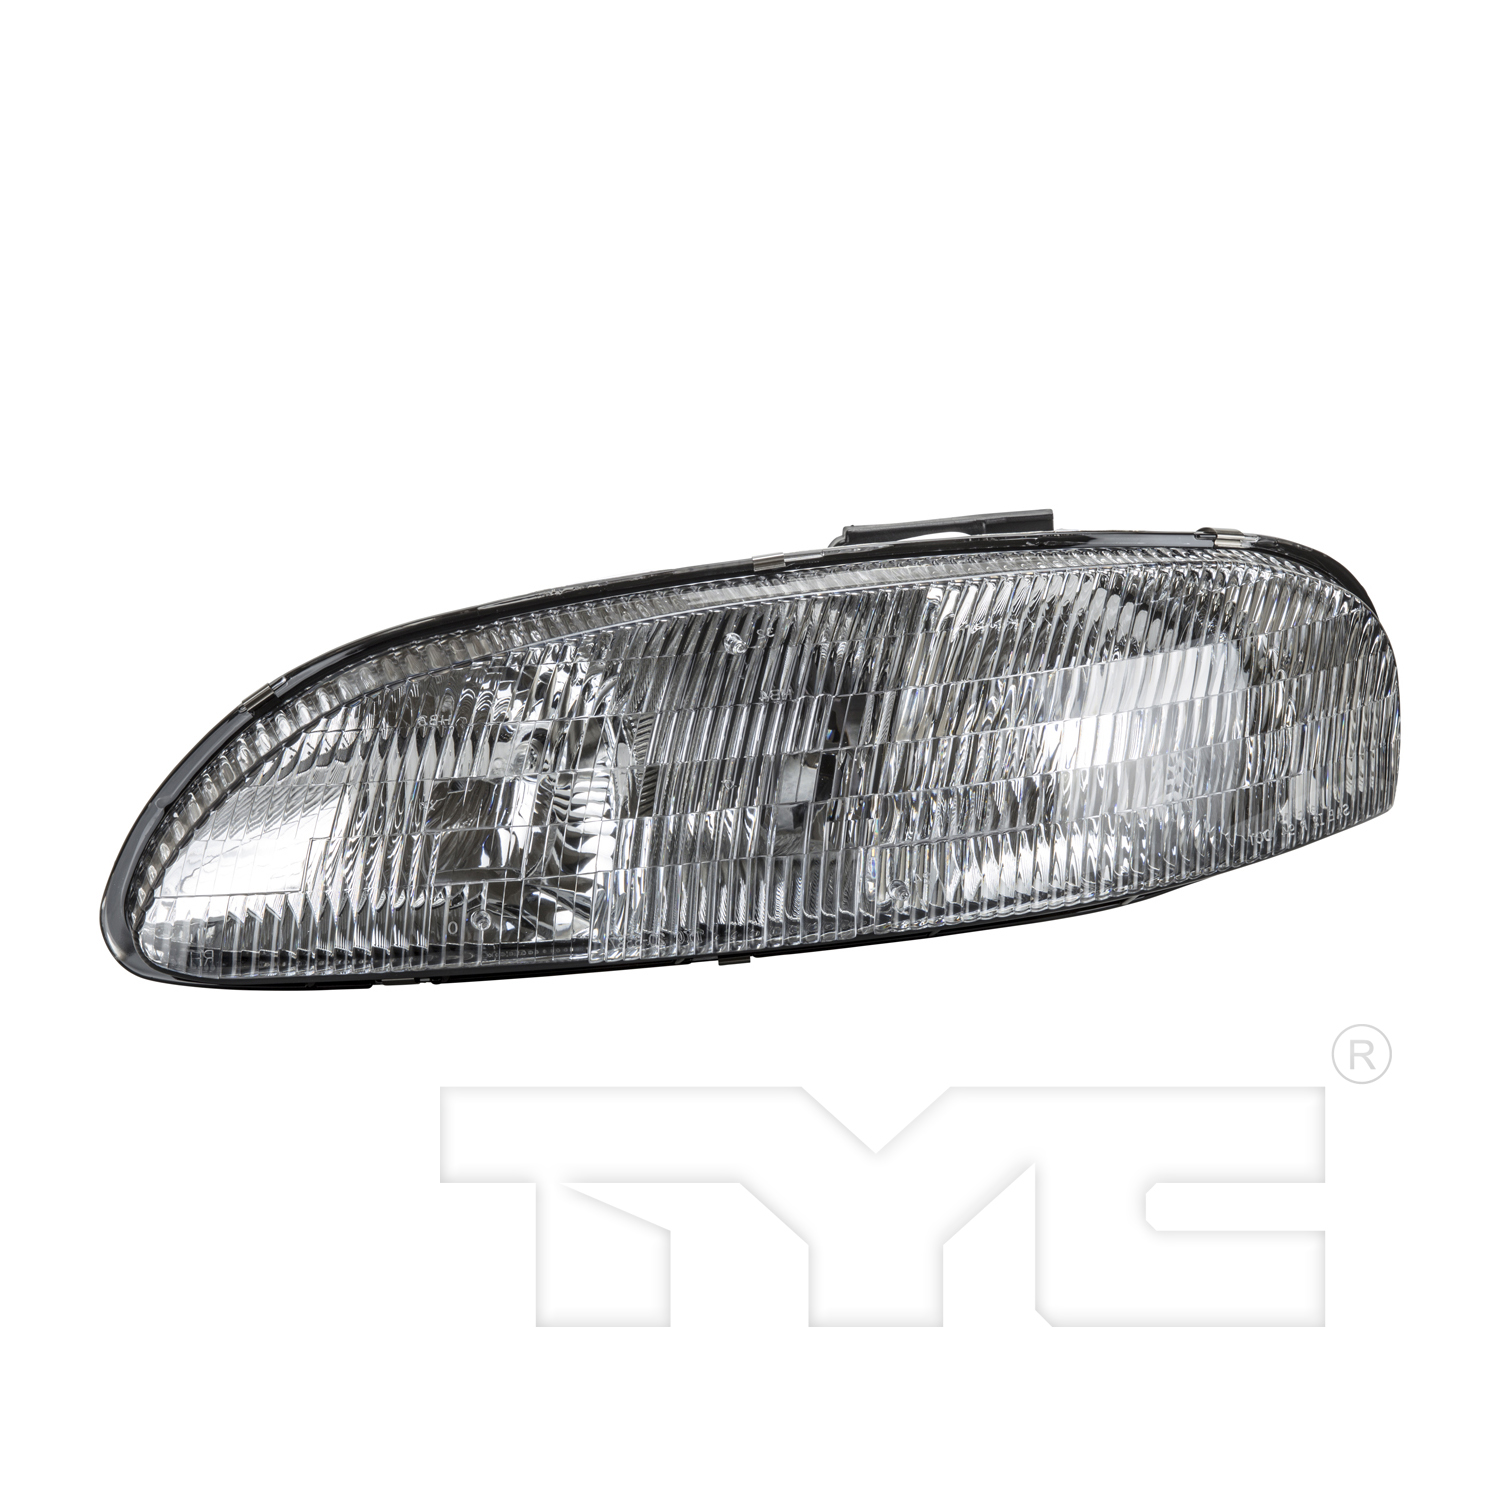 Aftermarket HEADLIGHTS for CHEVROLET - MONTE CARLO, MONTE CARLO,95-99,LT Headlamp assy composite